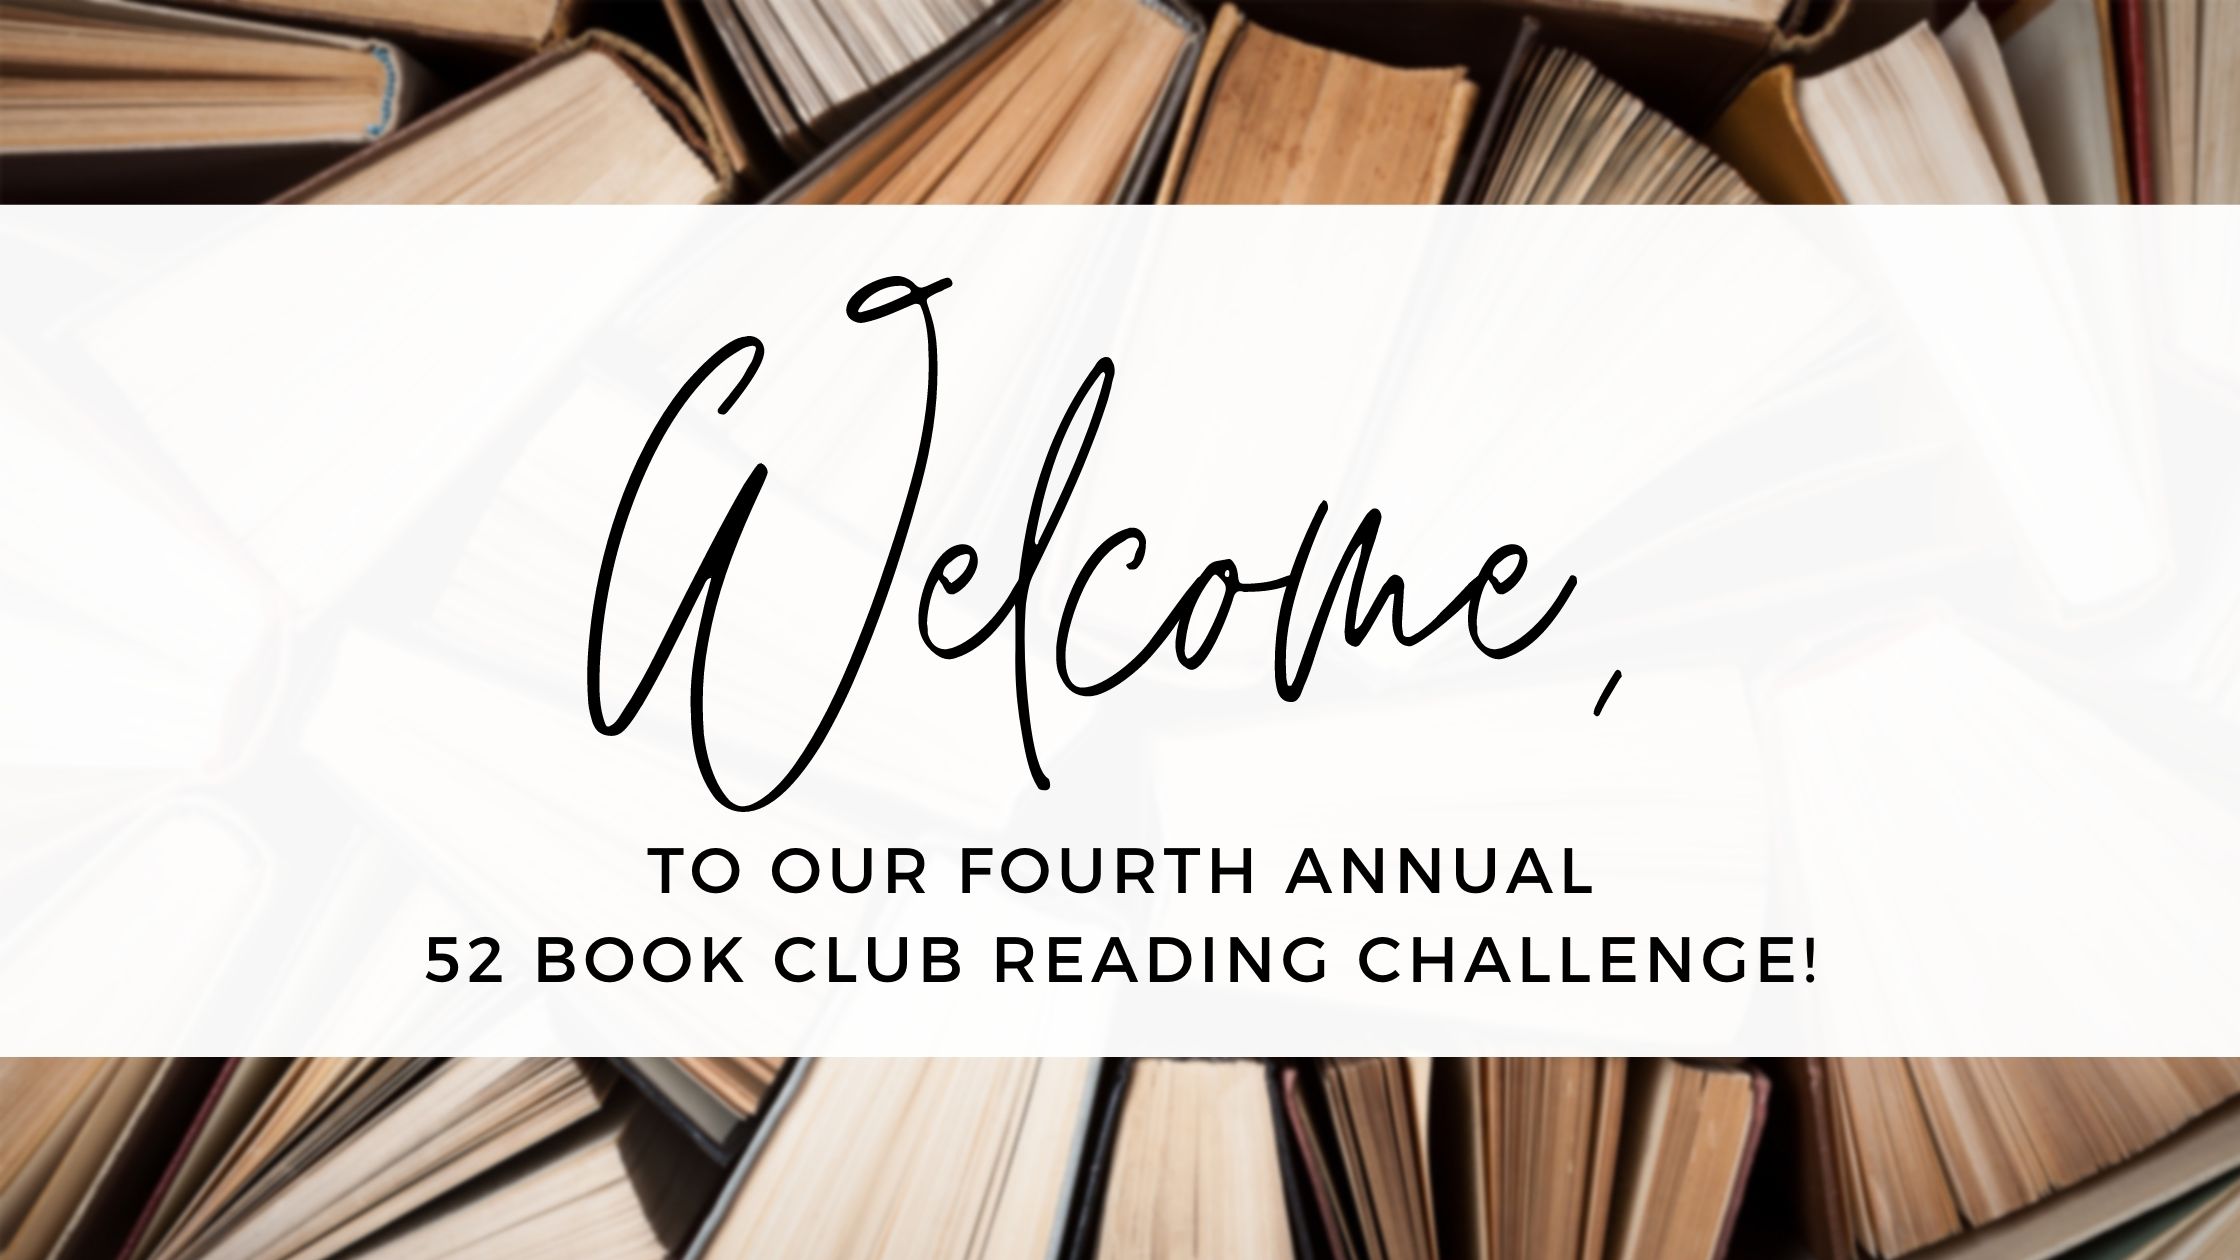 2021 Reading Challenge – The 52 Book Club